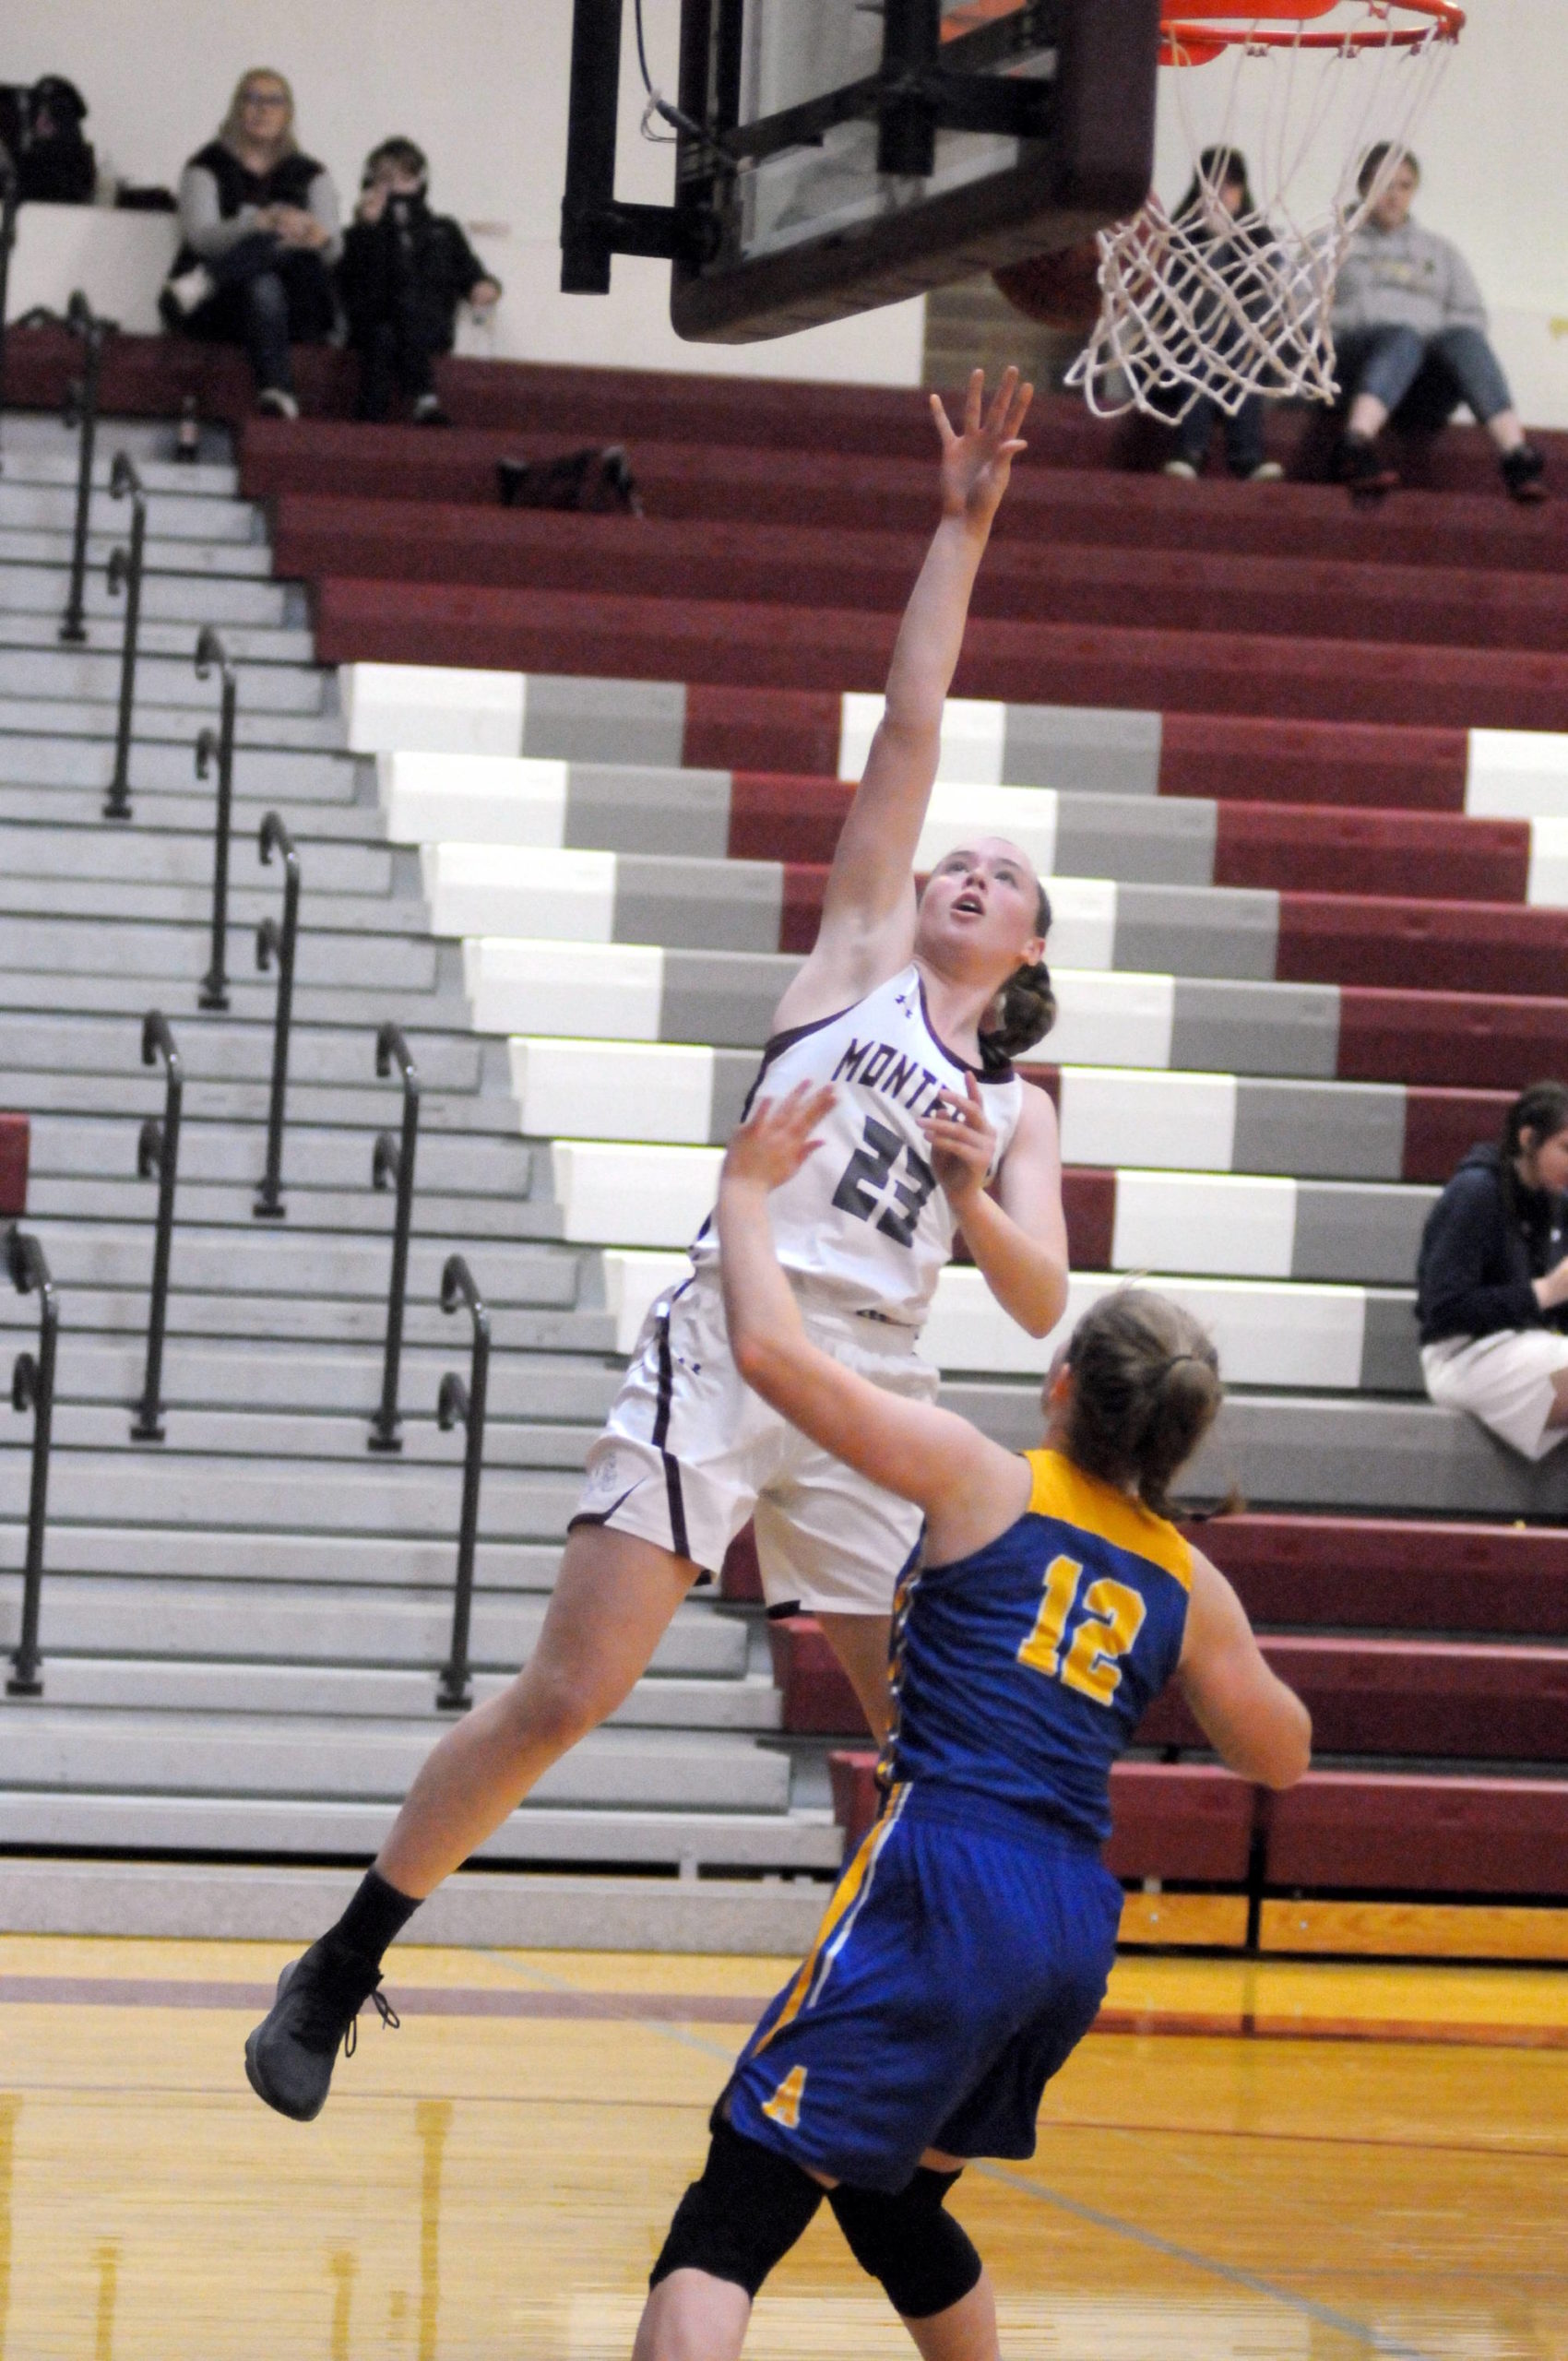 Ryan Sparks | Grays Harbor News Group                                Montesano sophomore Paige Lisherness (23) scores on a layup during Saturday’s 68-49 win over Adna at Montesano High School. Lisherness scored a team-high 19 points in the victory.